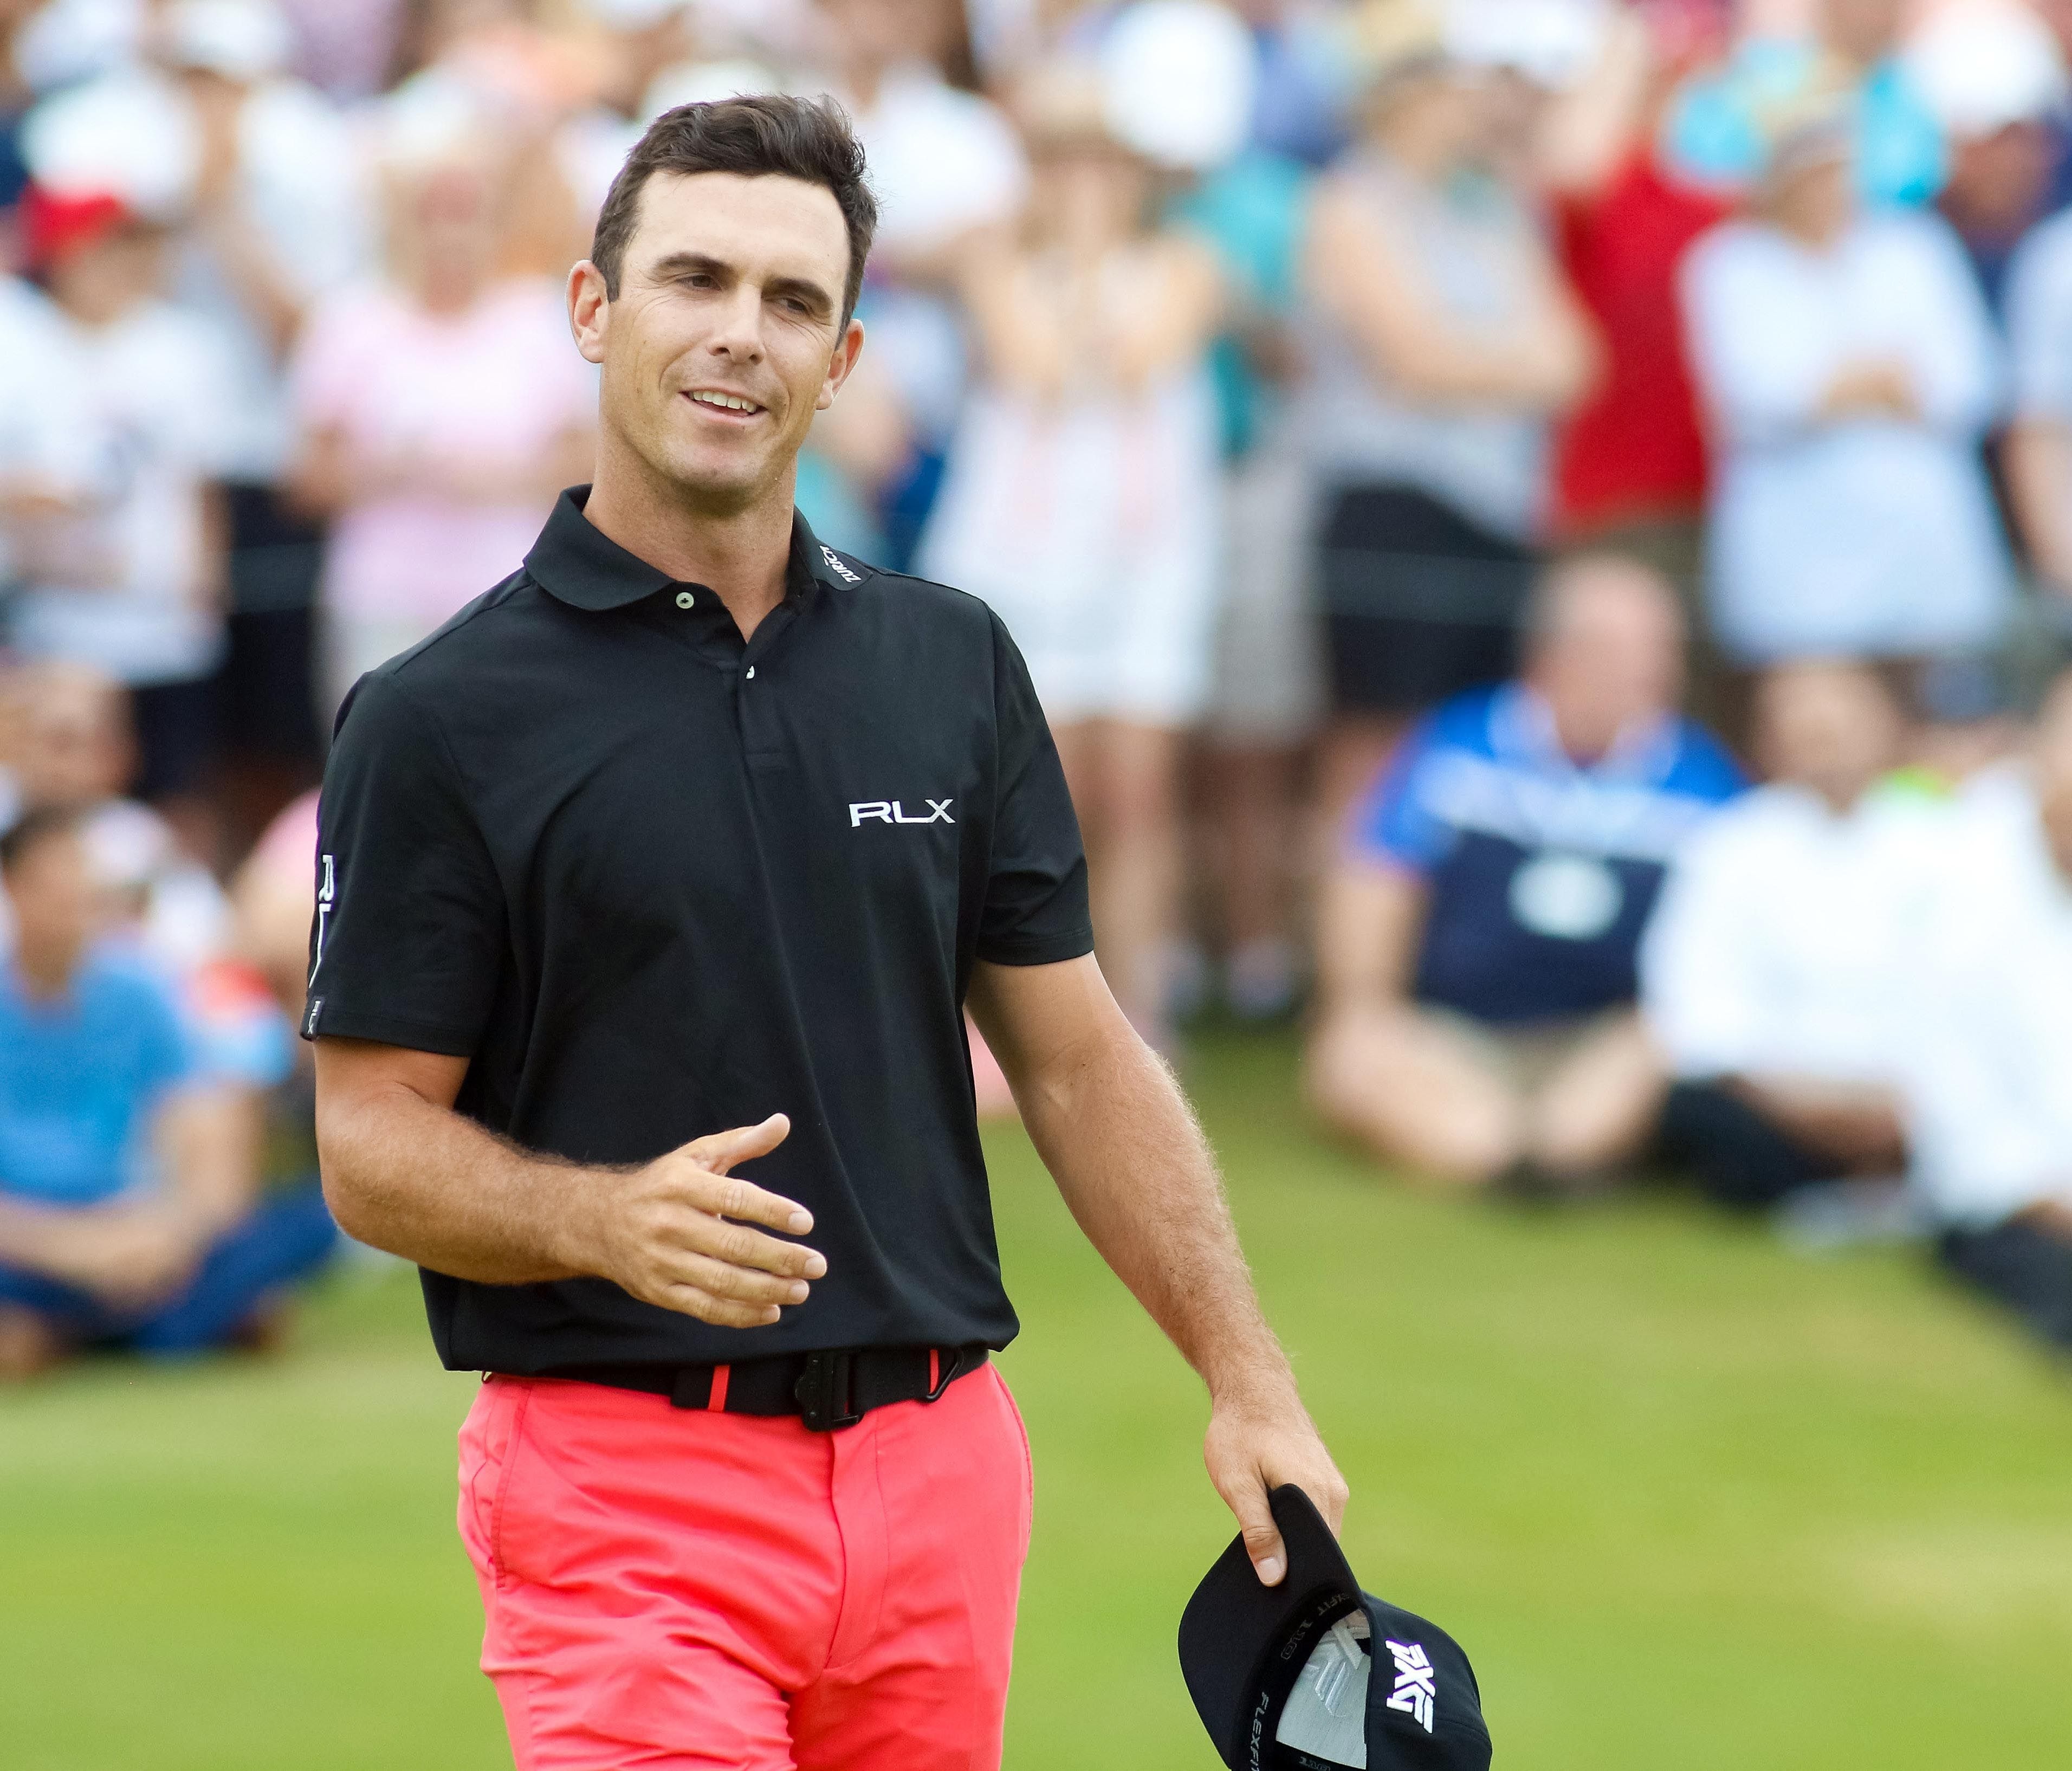 Billy Horschel goes to shake the hand of Jason Day (not pictured) after beating Day in a playoff to win the AT&T Byron Nelson on May 21.